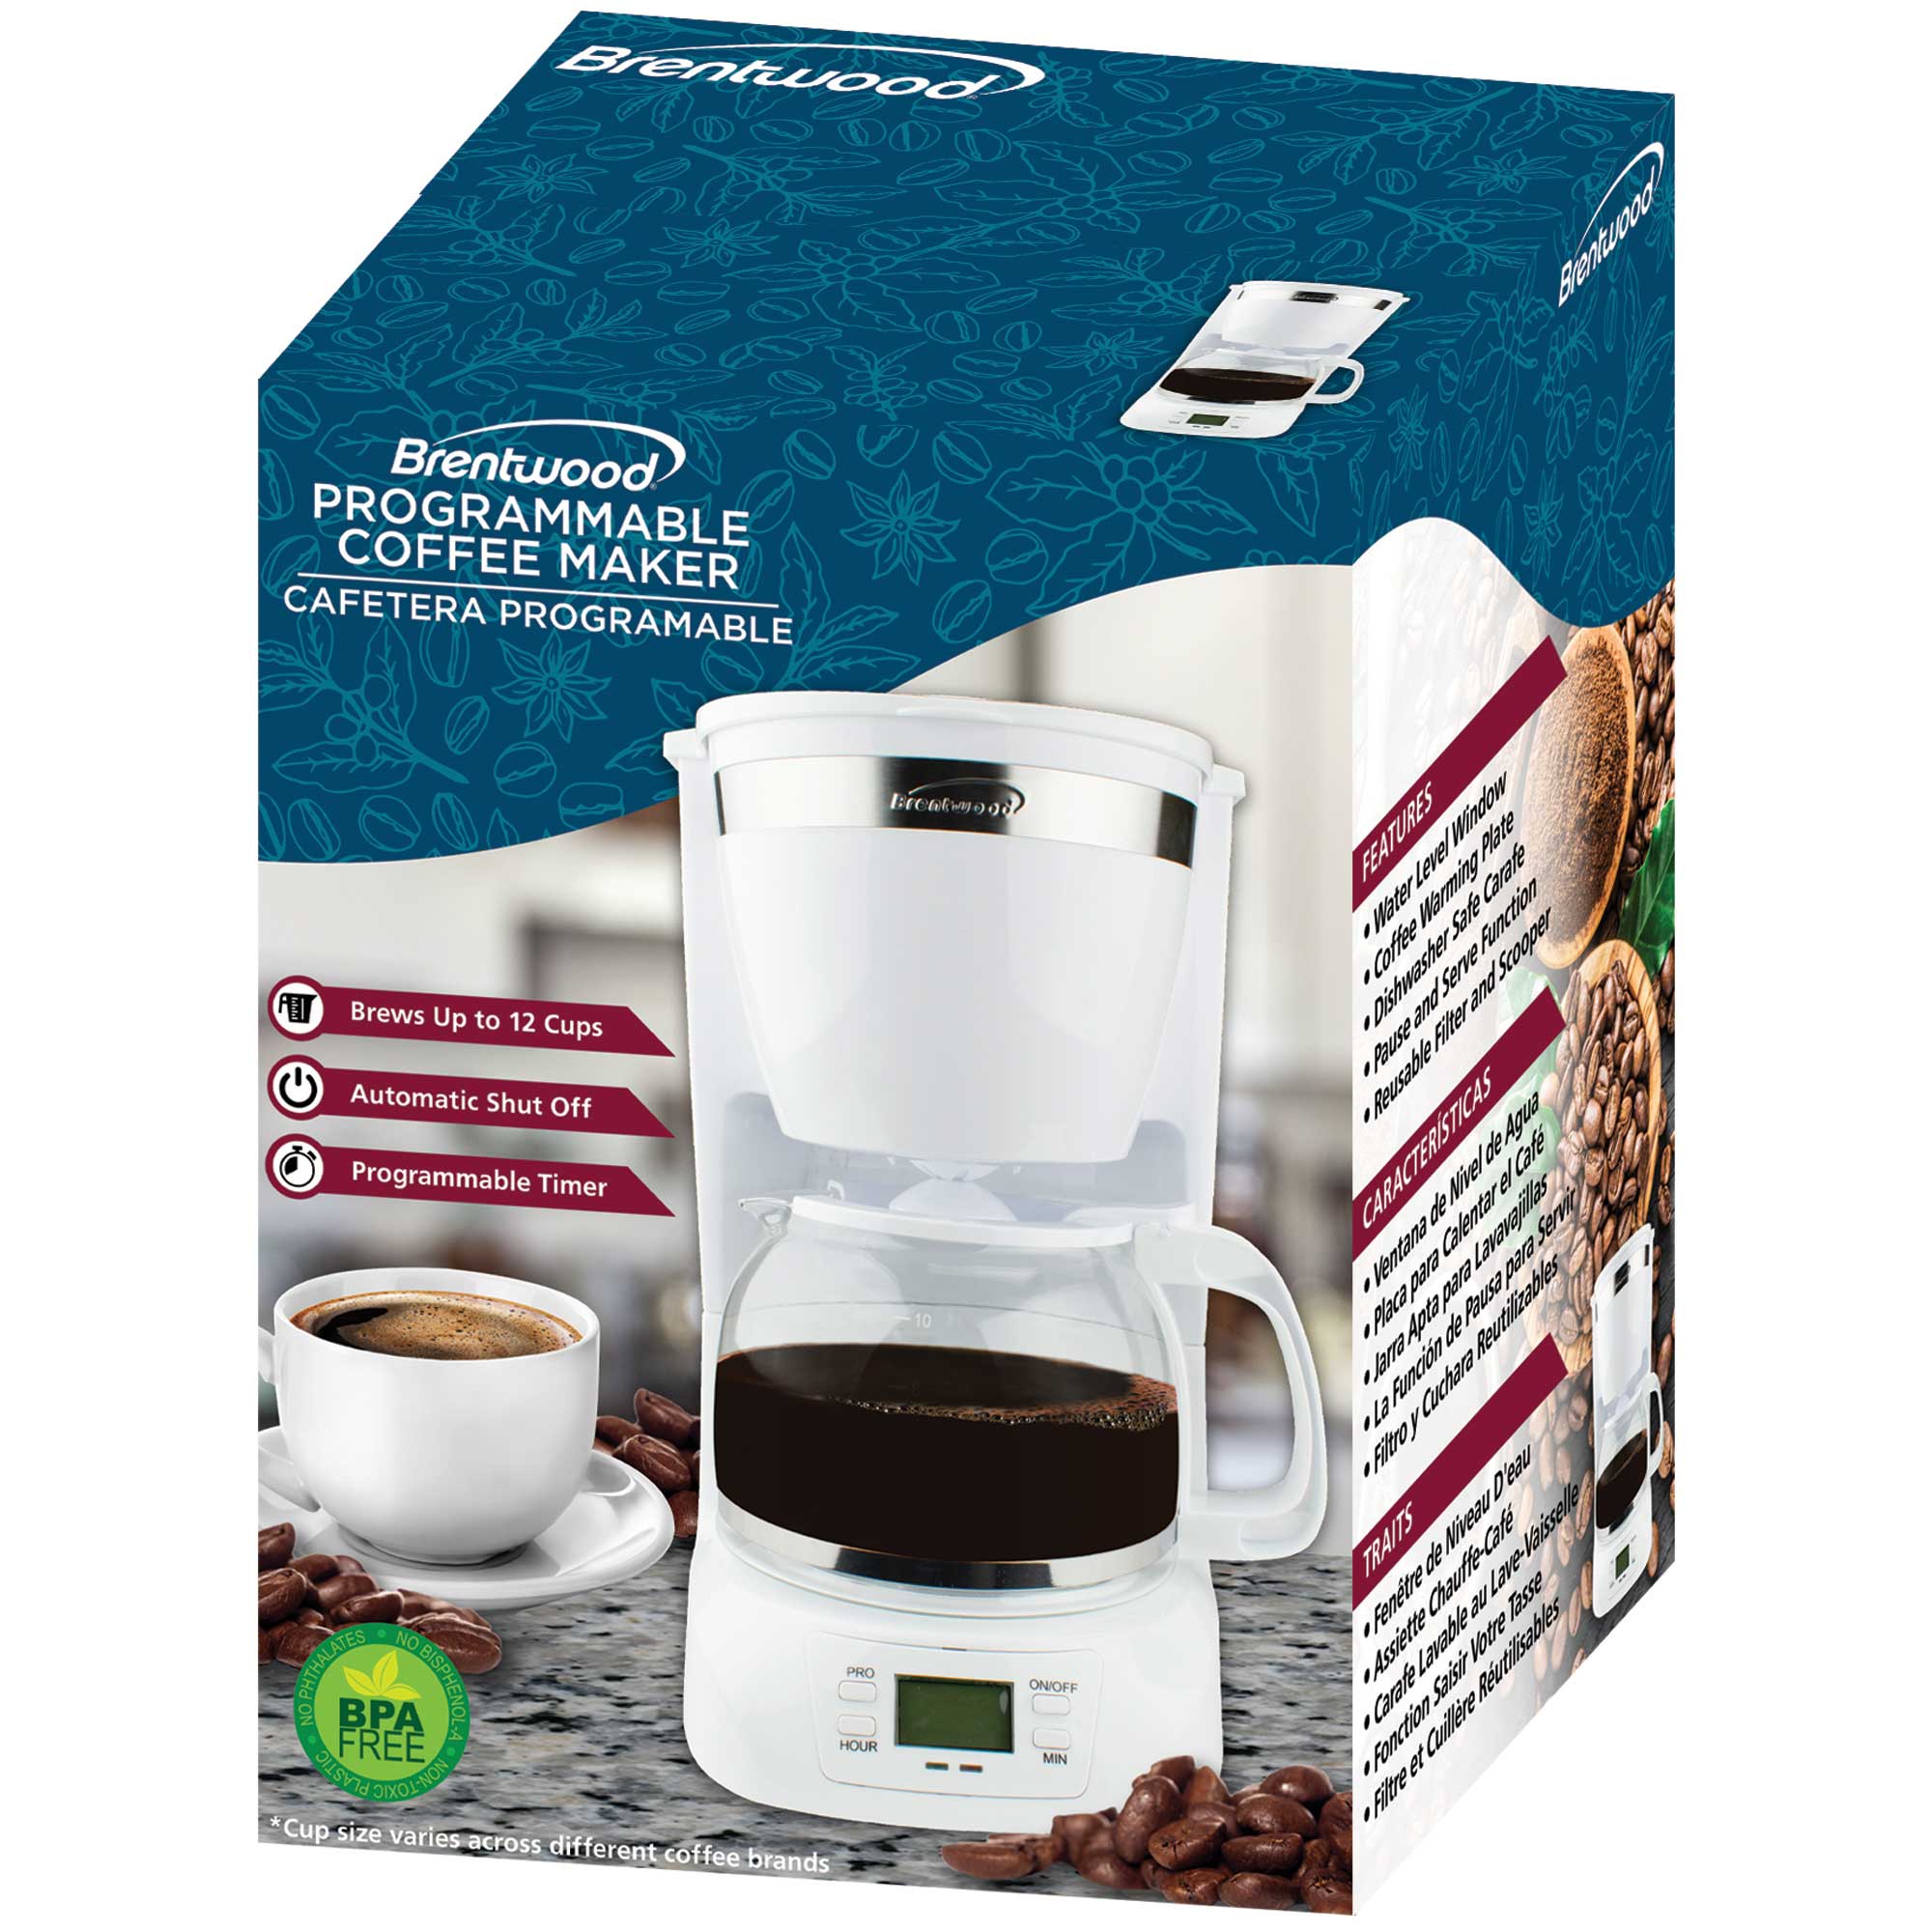 Brentwood Appliances TS-219W 10-Cup Digital Coffee Maker (White)